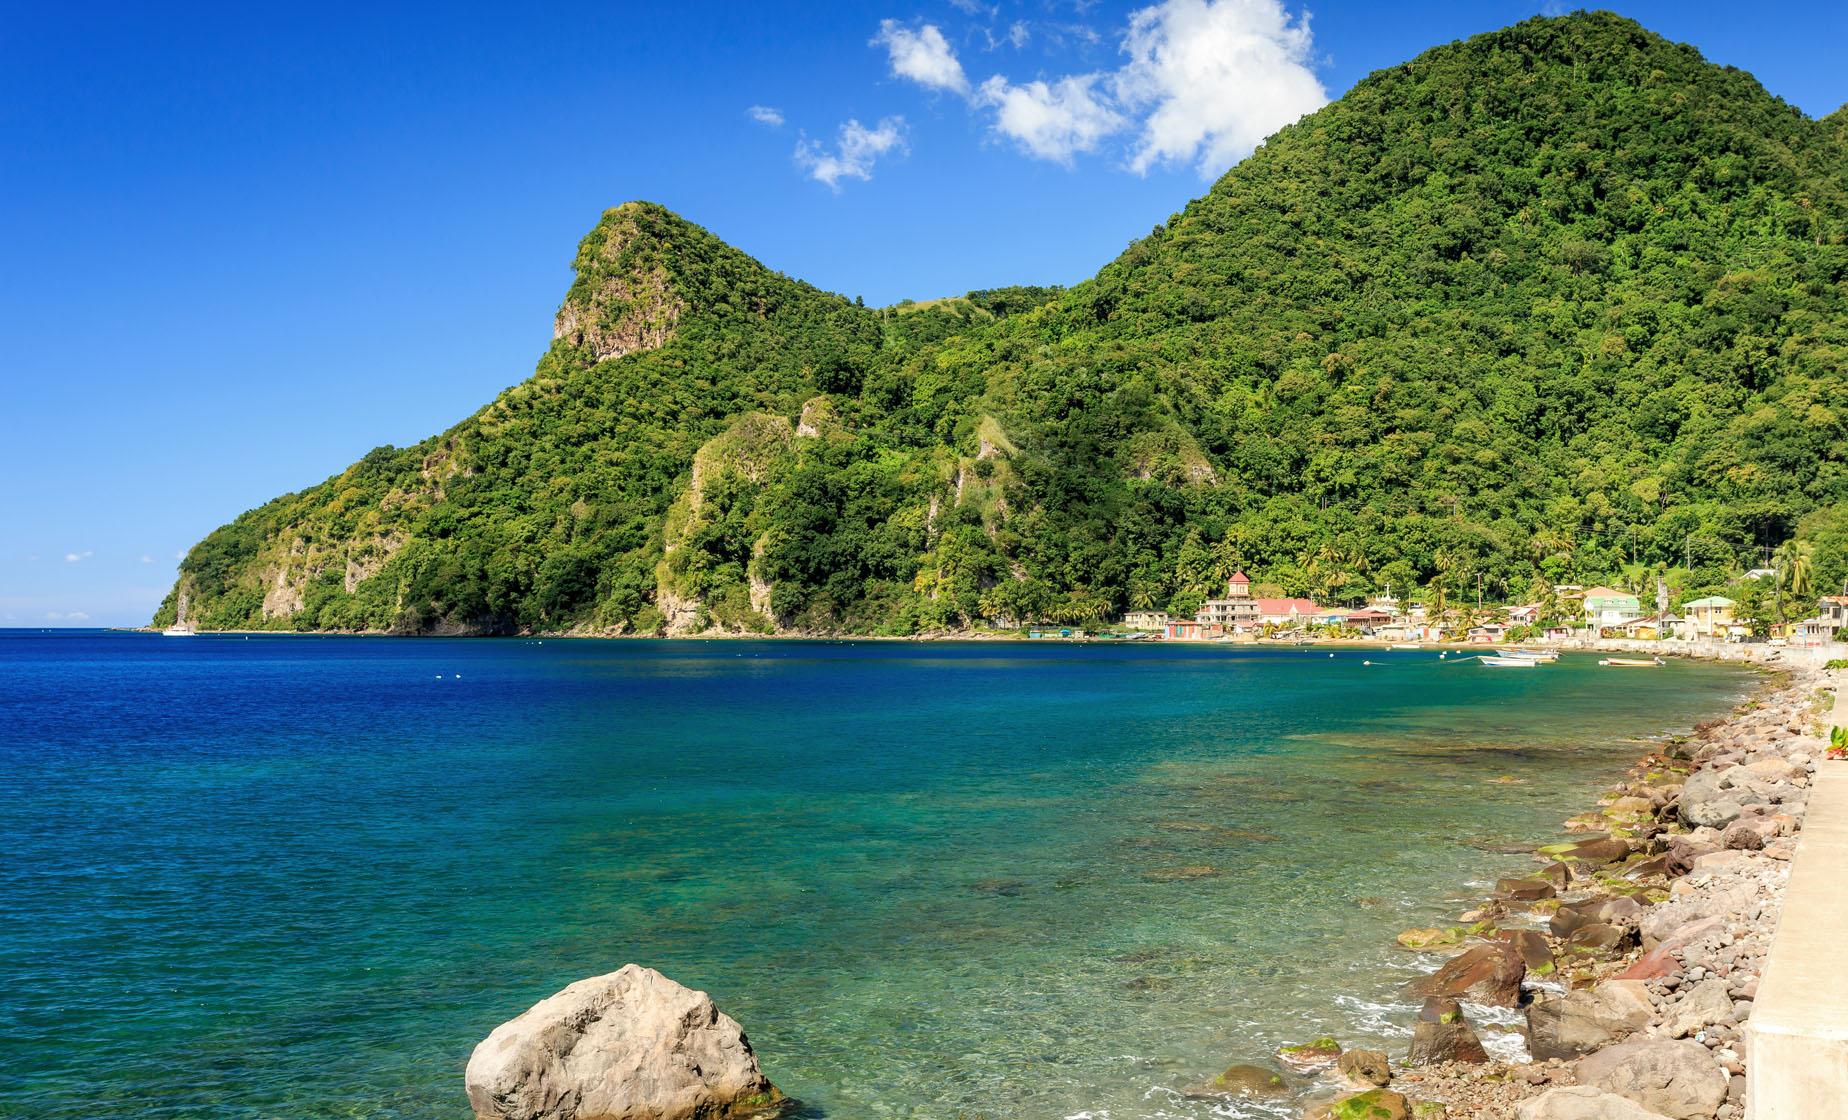 The 10 Best Dominica Island Shore Excursion Tours For Caribbean Cruises